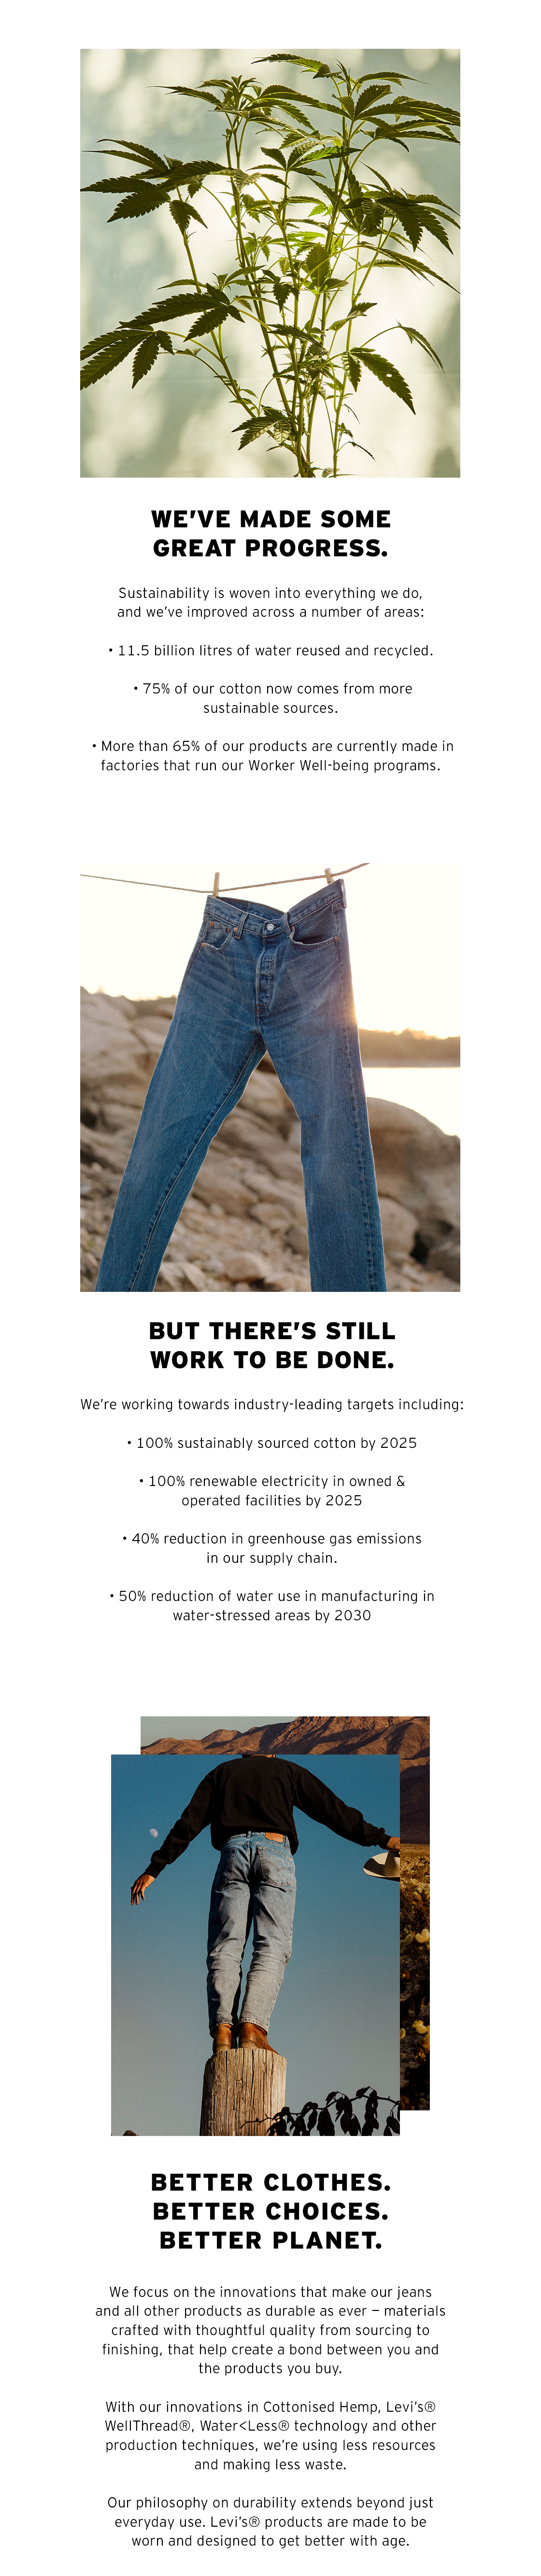 Levi's® Sustainability - Giving More + Taking Less